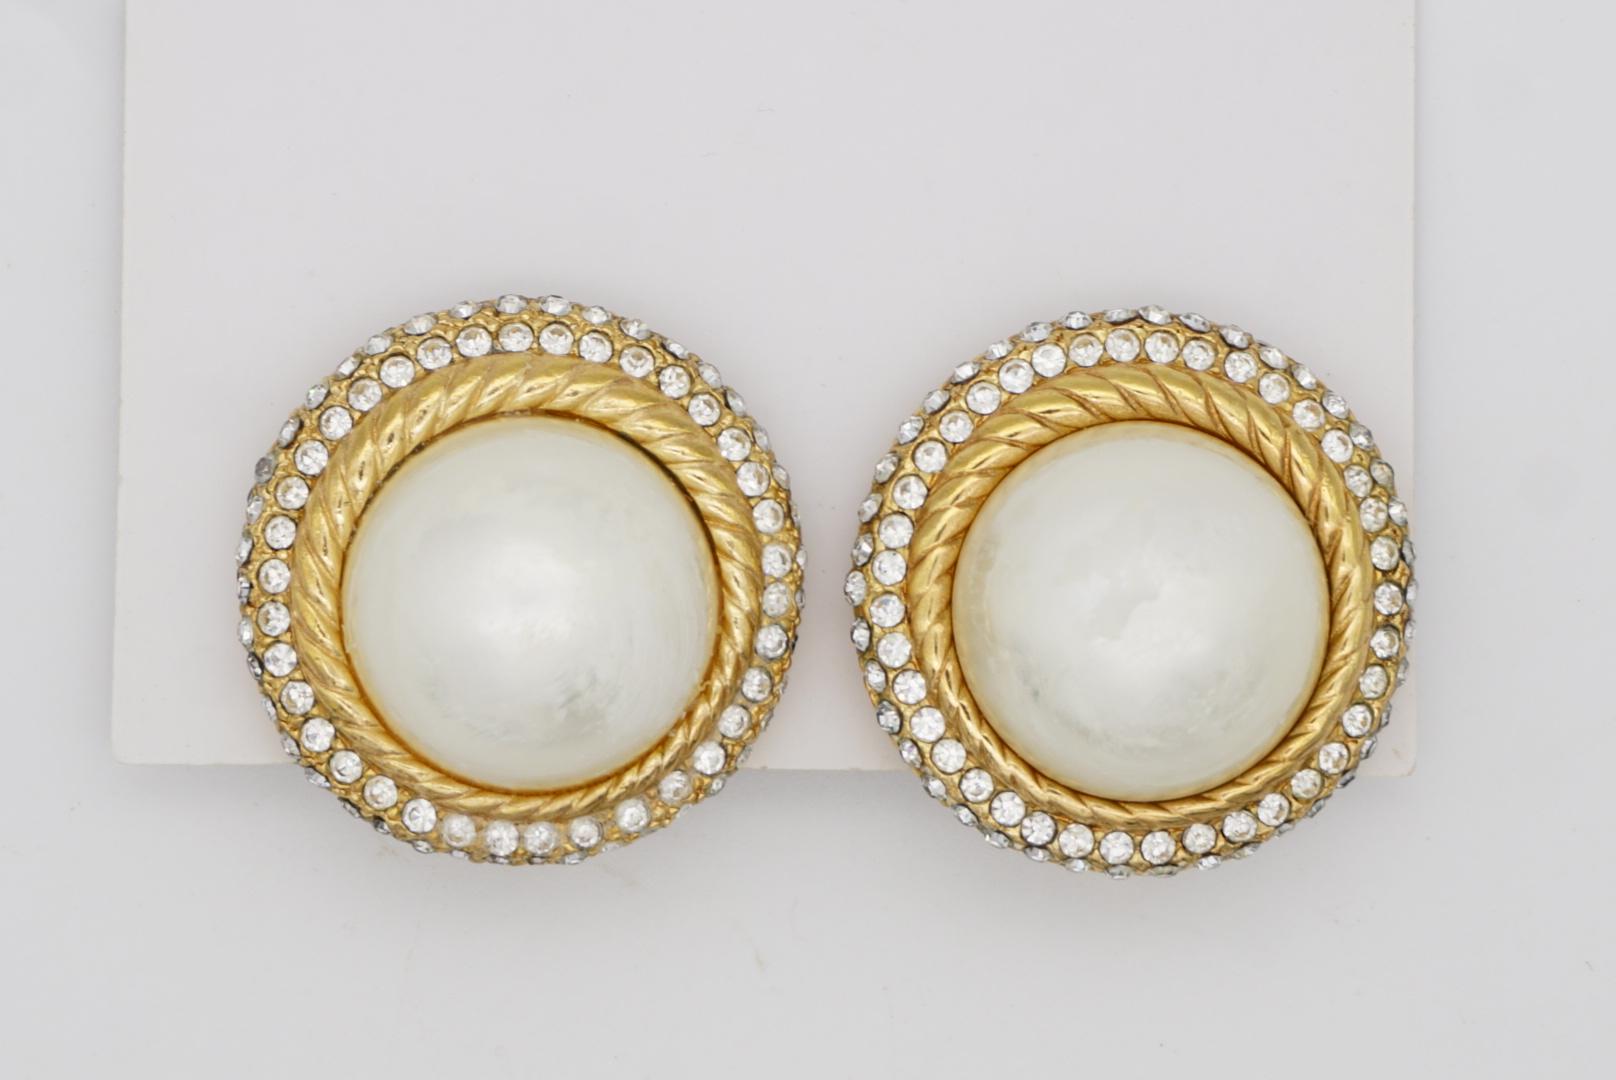 Christian Dior Vintage 1960s Extra Large Round Matte Pearl Crystal Clip Earrings In Good Condition For Sale In Wokingham, England